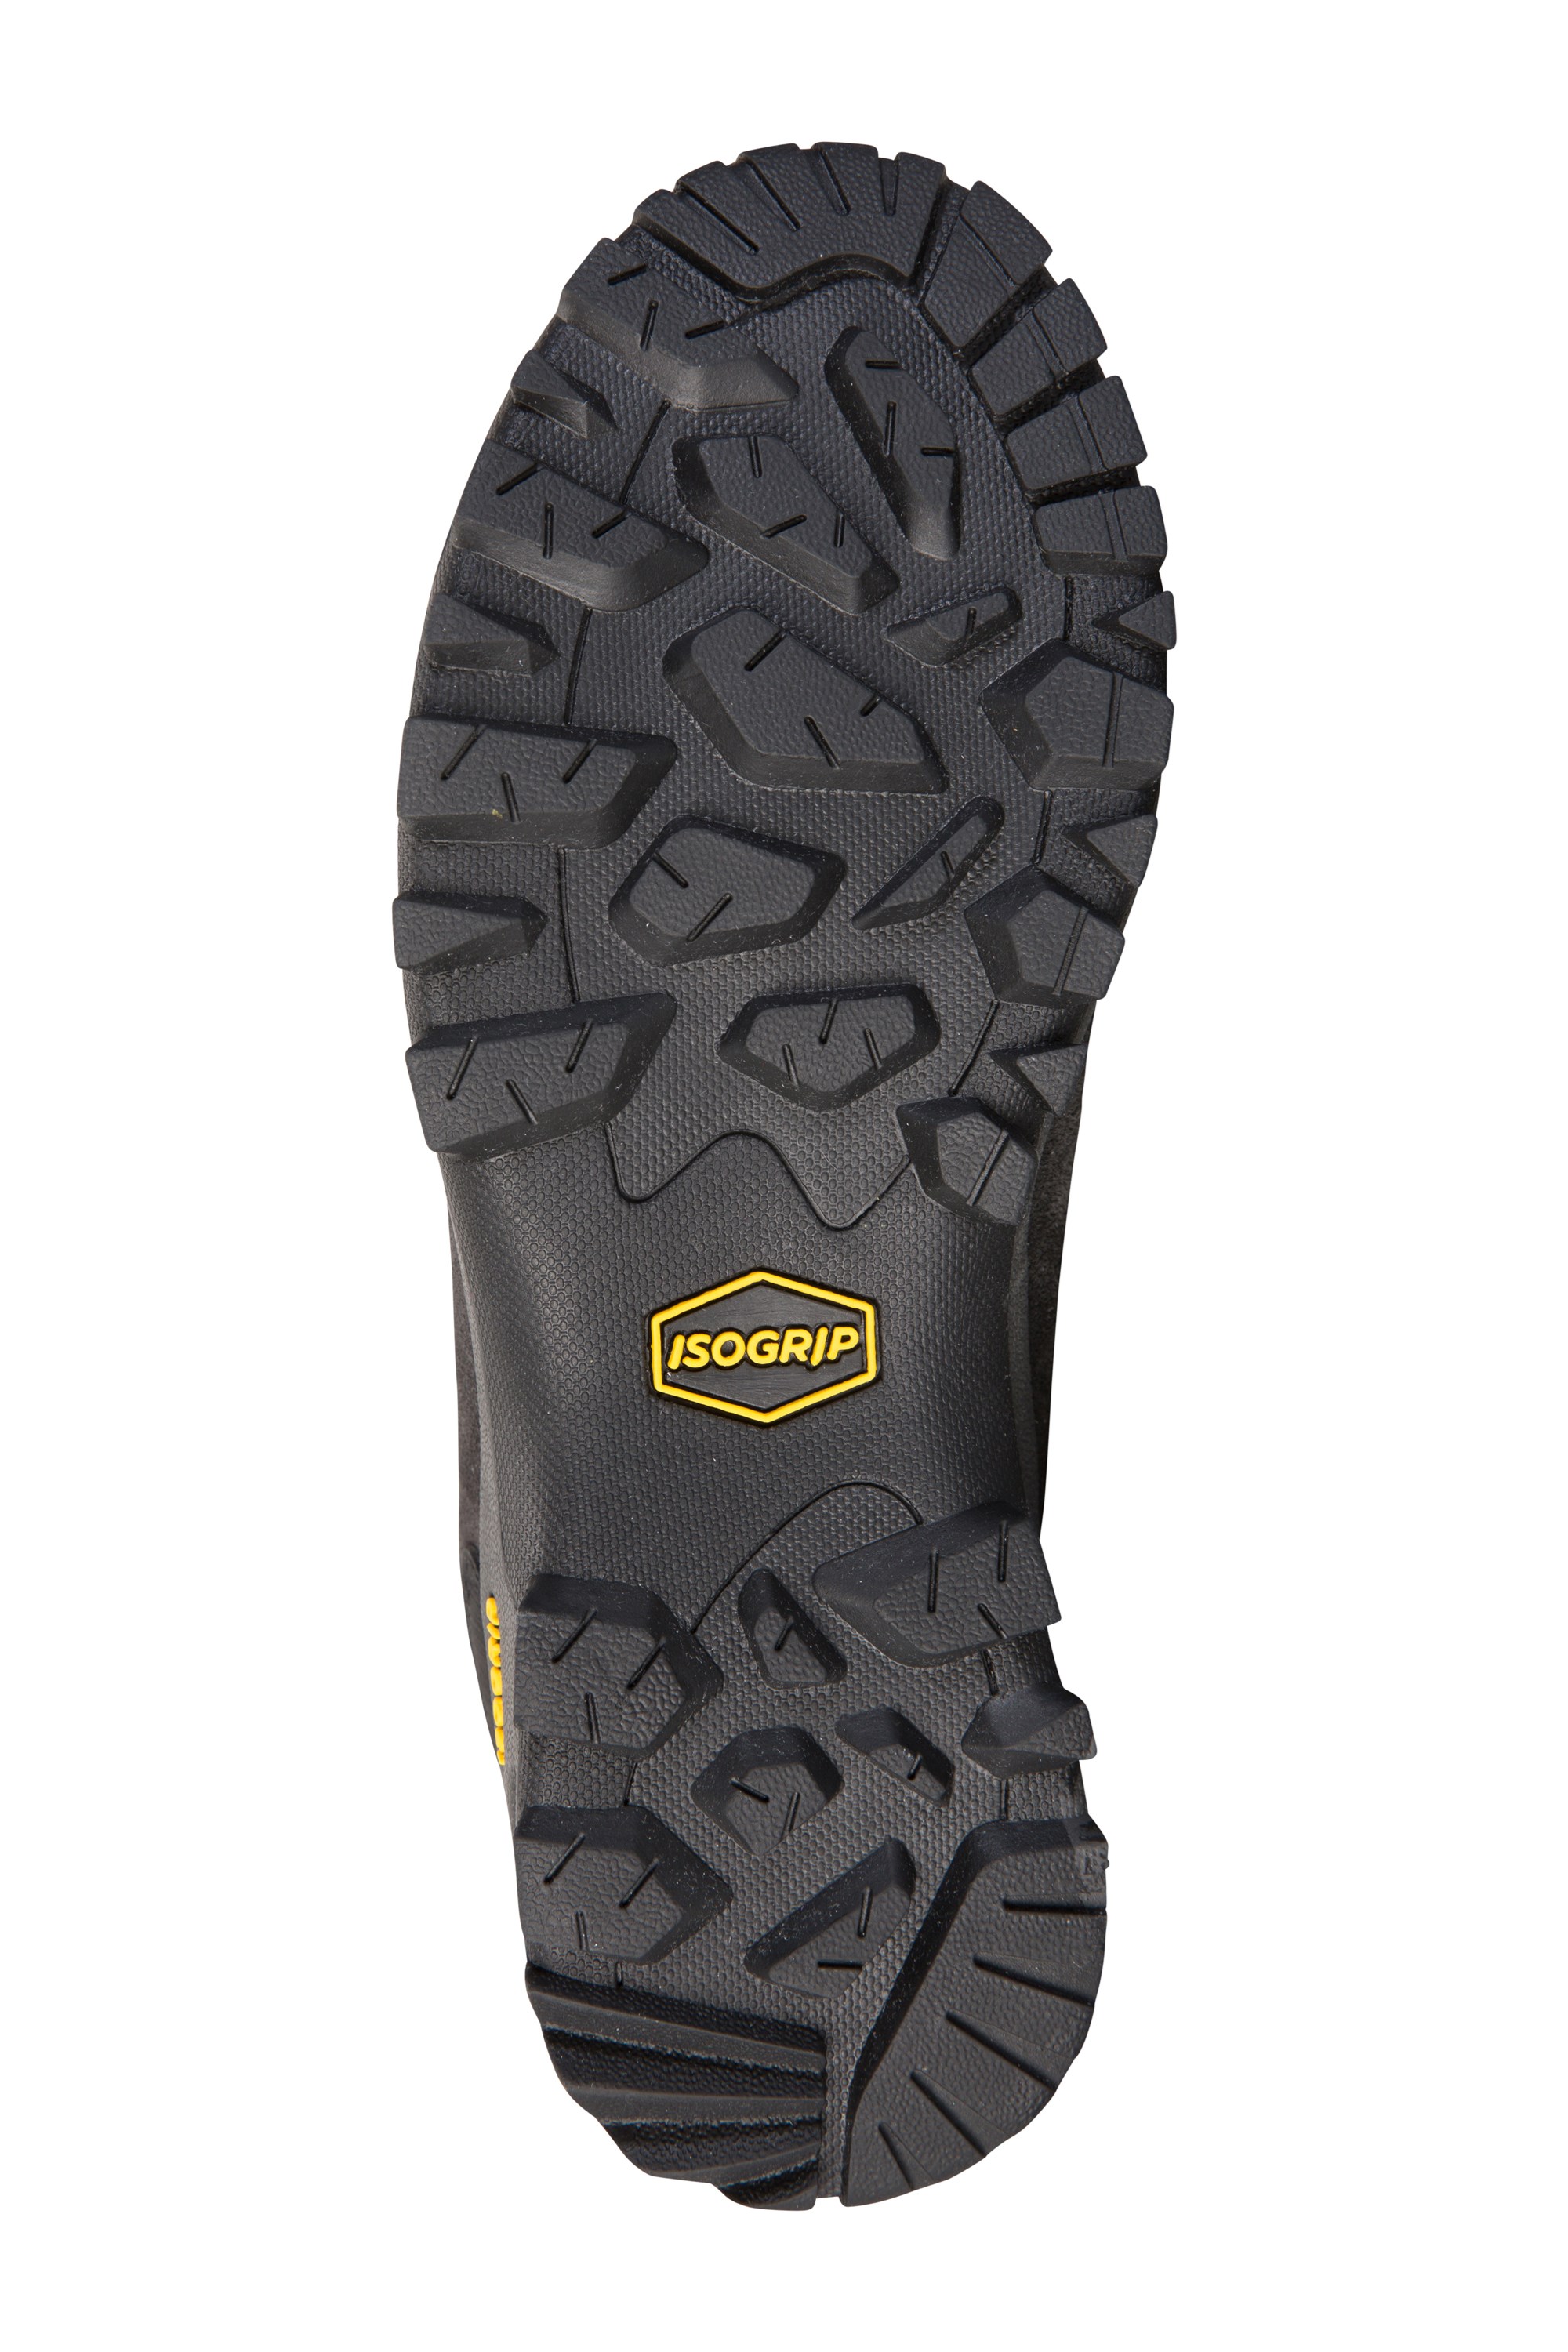 mountain warehouse storm boots